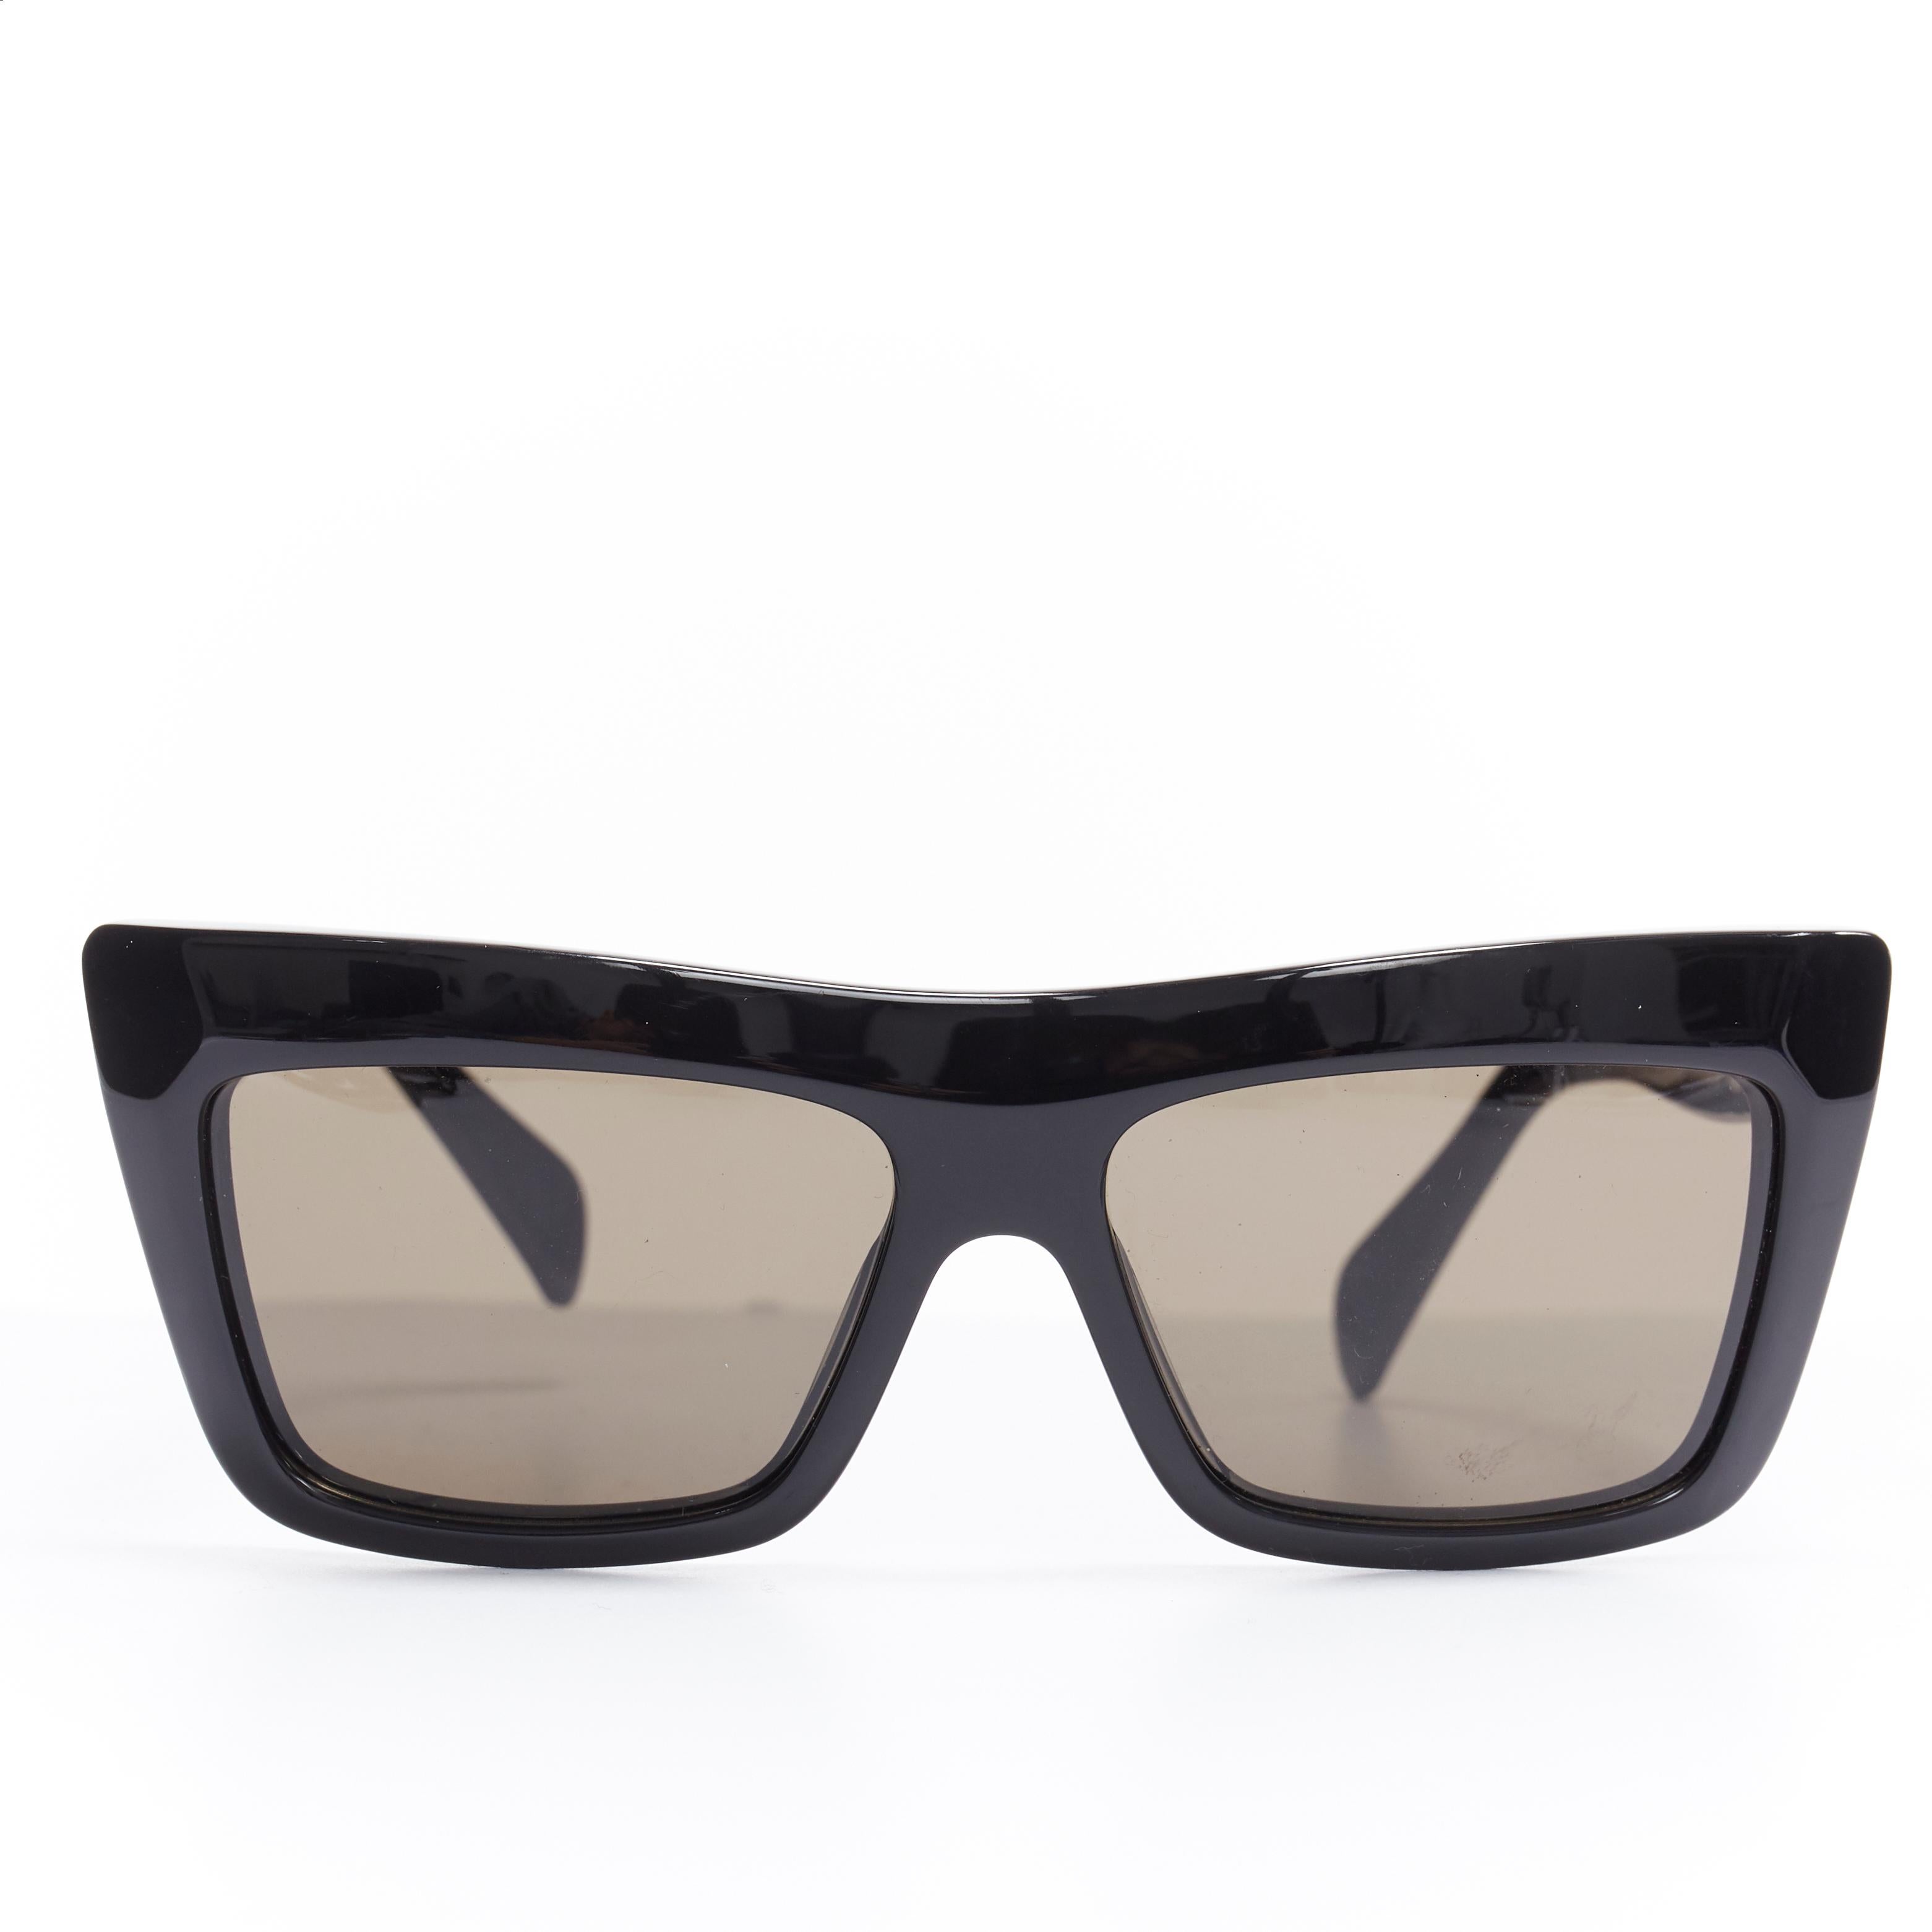 CELINE PHOEBE PHILO black angular thick frame grey lens sunglasses 
Reference: WEYN/A00346 
Brand: Celine 
Designer: Phoebe Philo 
Material: Plastic 
Color: Black 
Pattern: Solid 
Made in: Italy 

CONDITION: 
Condition: Very good, this item was